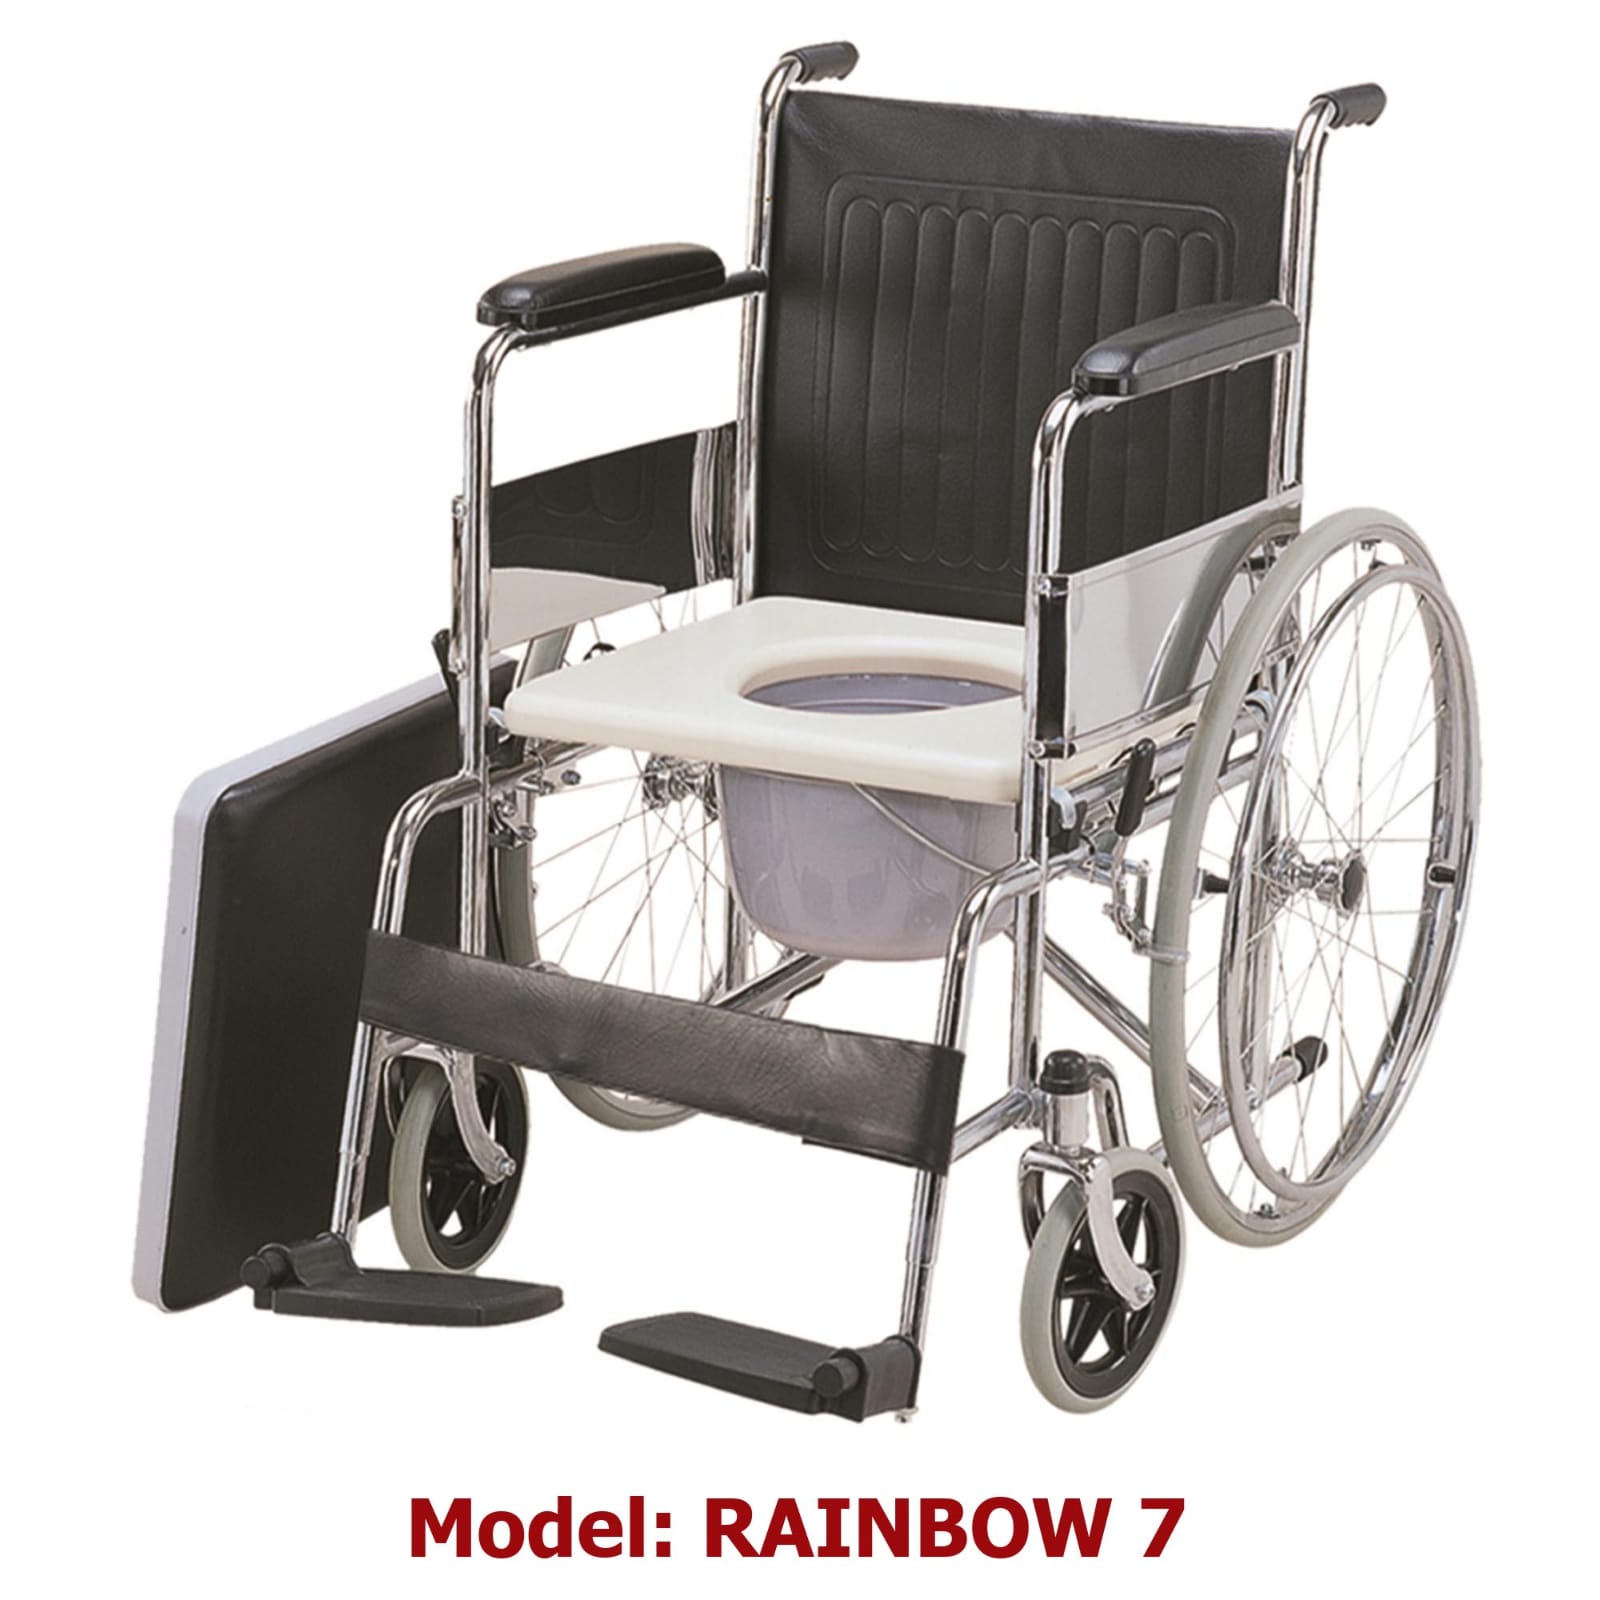 Karma Commode Wheelchair Rainbow 7 On Sale Suppliers, Service Provider in Meerut